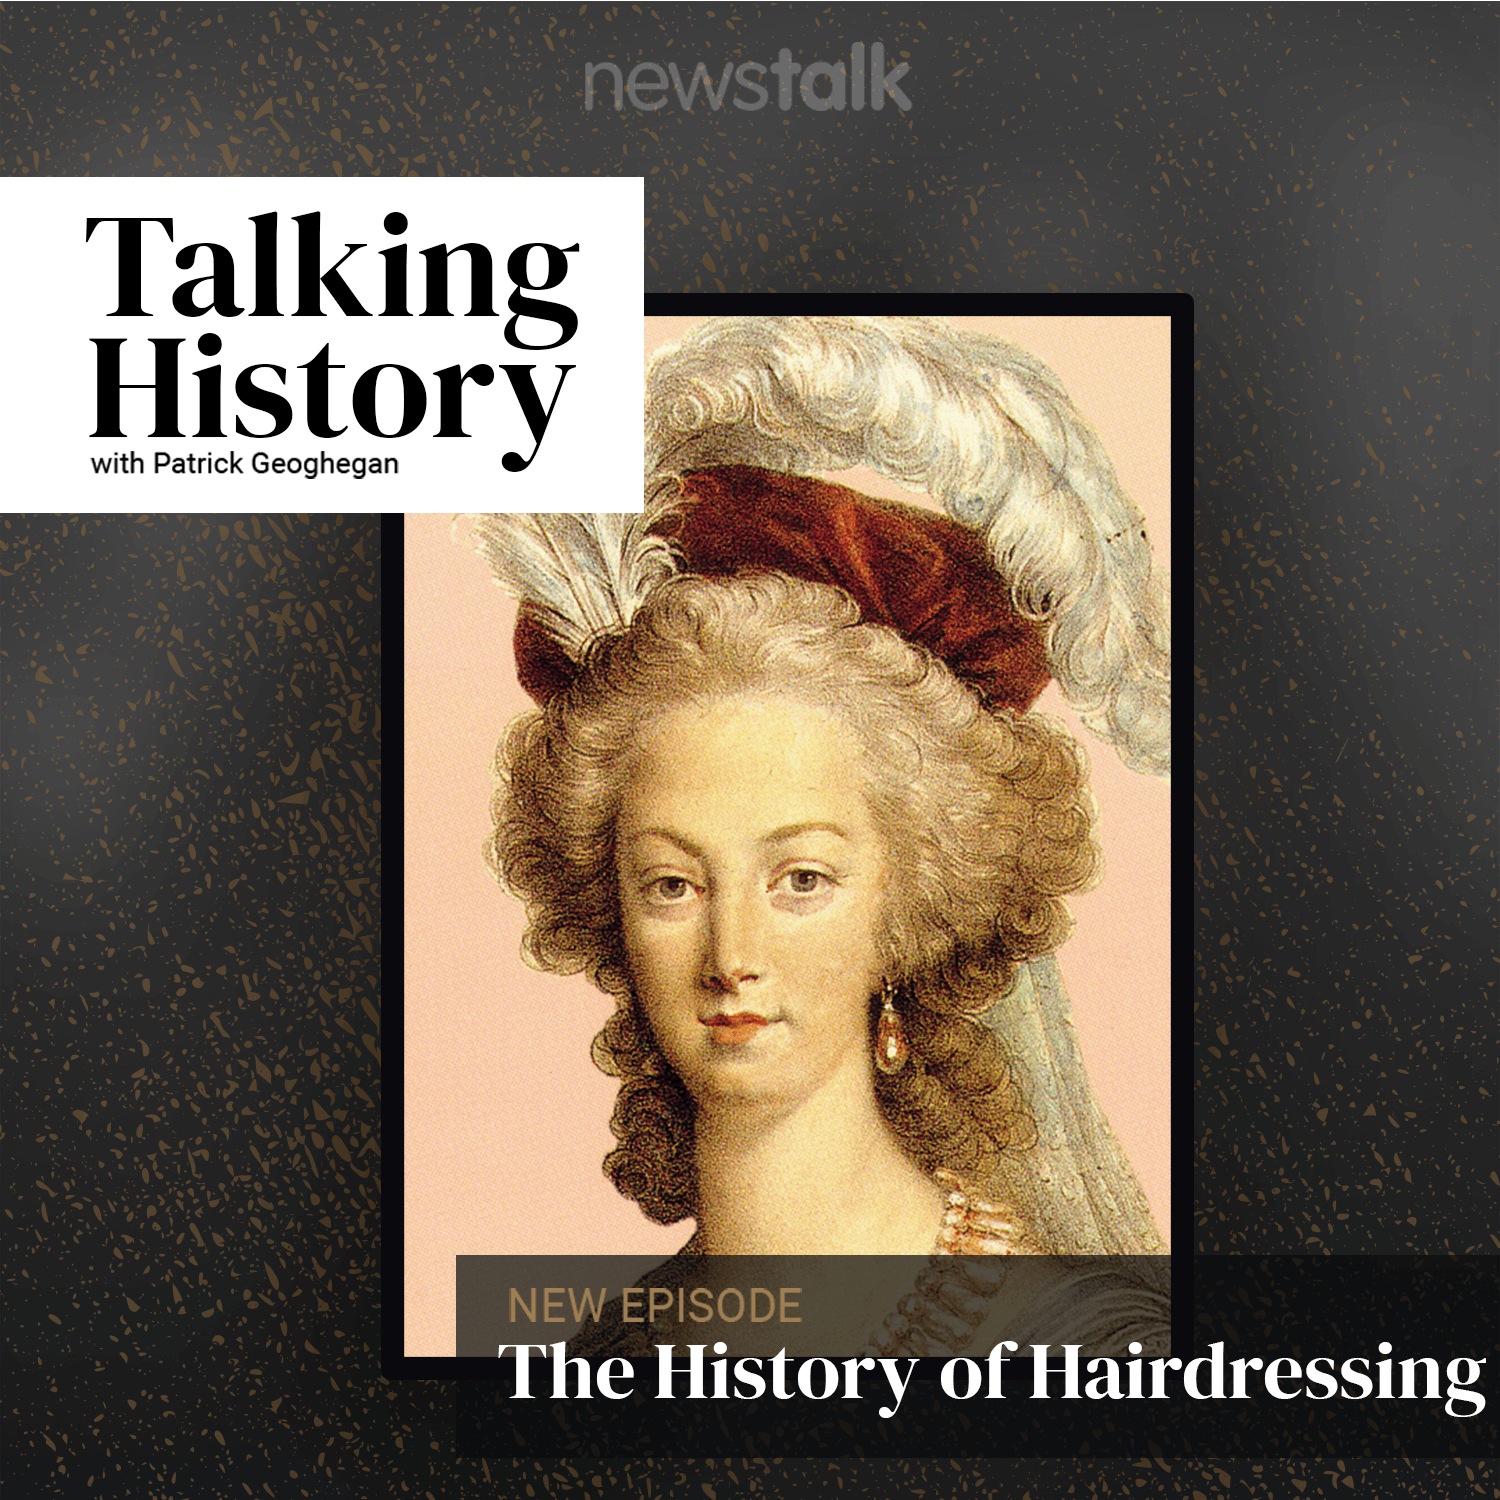 The History of Hairdressing